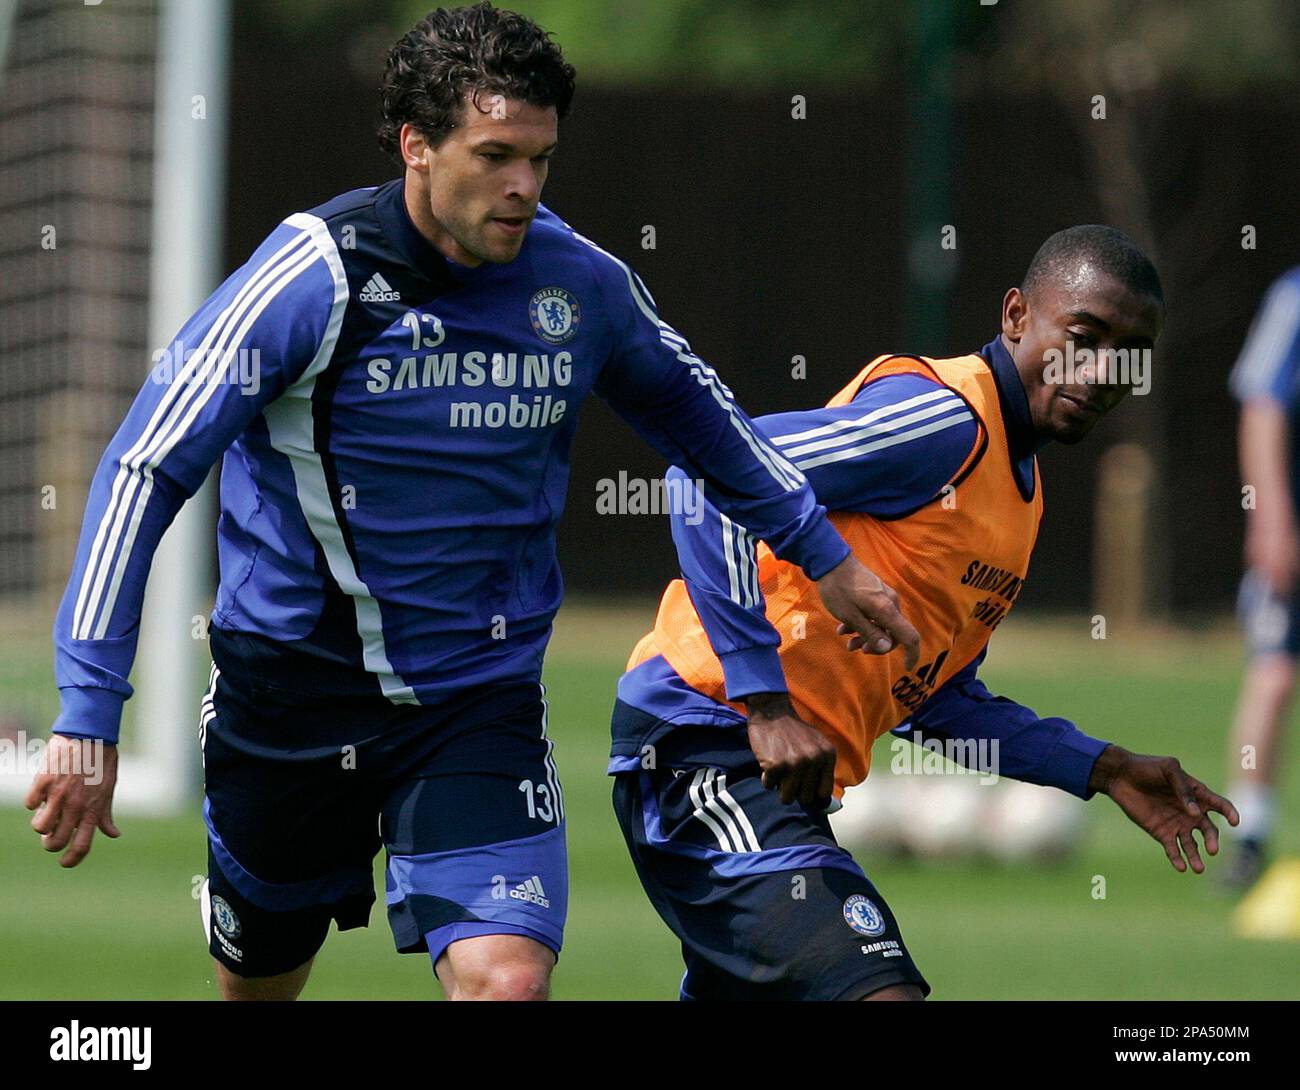 Chelsea's Michael Ballack, left and Salomon Kalou tussle for the ball as  they train at Chelsea's training facility in Cobham, England, Wednesday,  May 14, 2008. Chelsea will play Manchester United in the